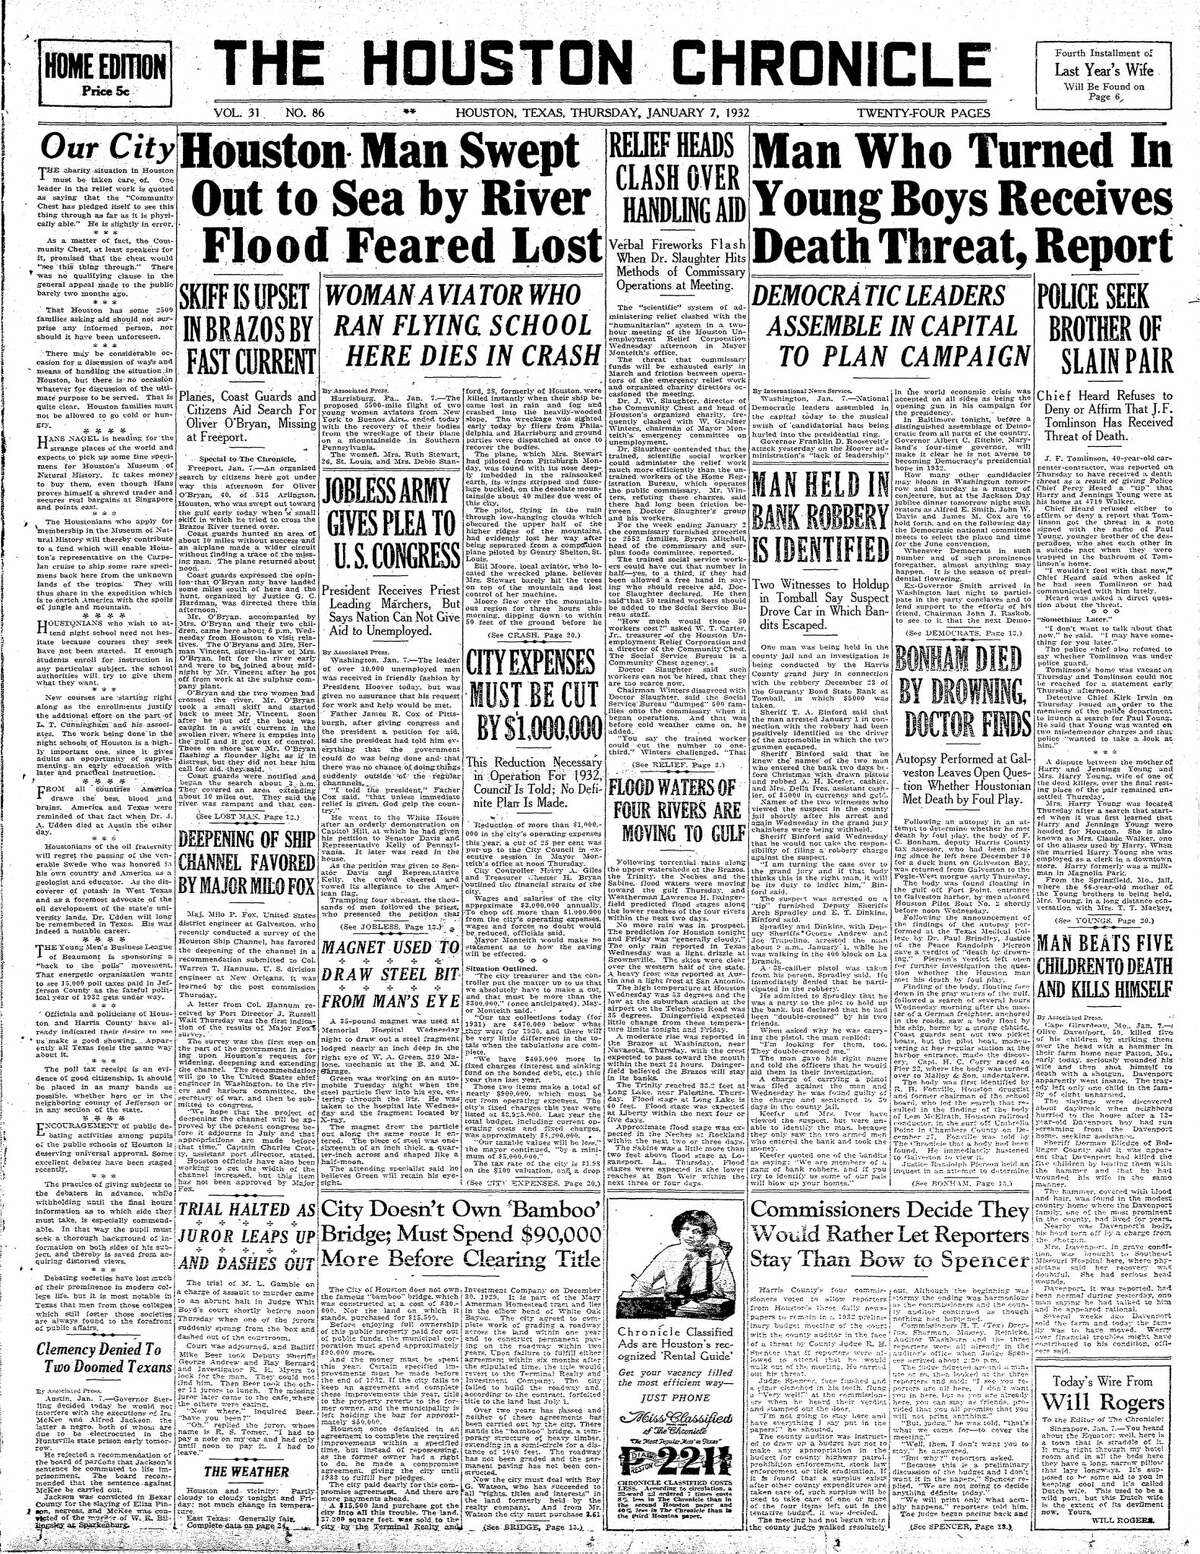 Houston Chronicle front page for Jan. 7, 1932.